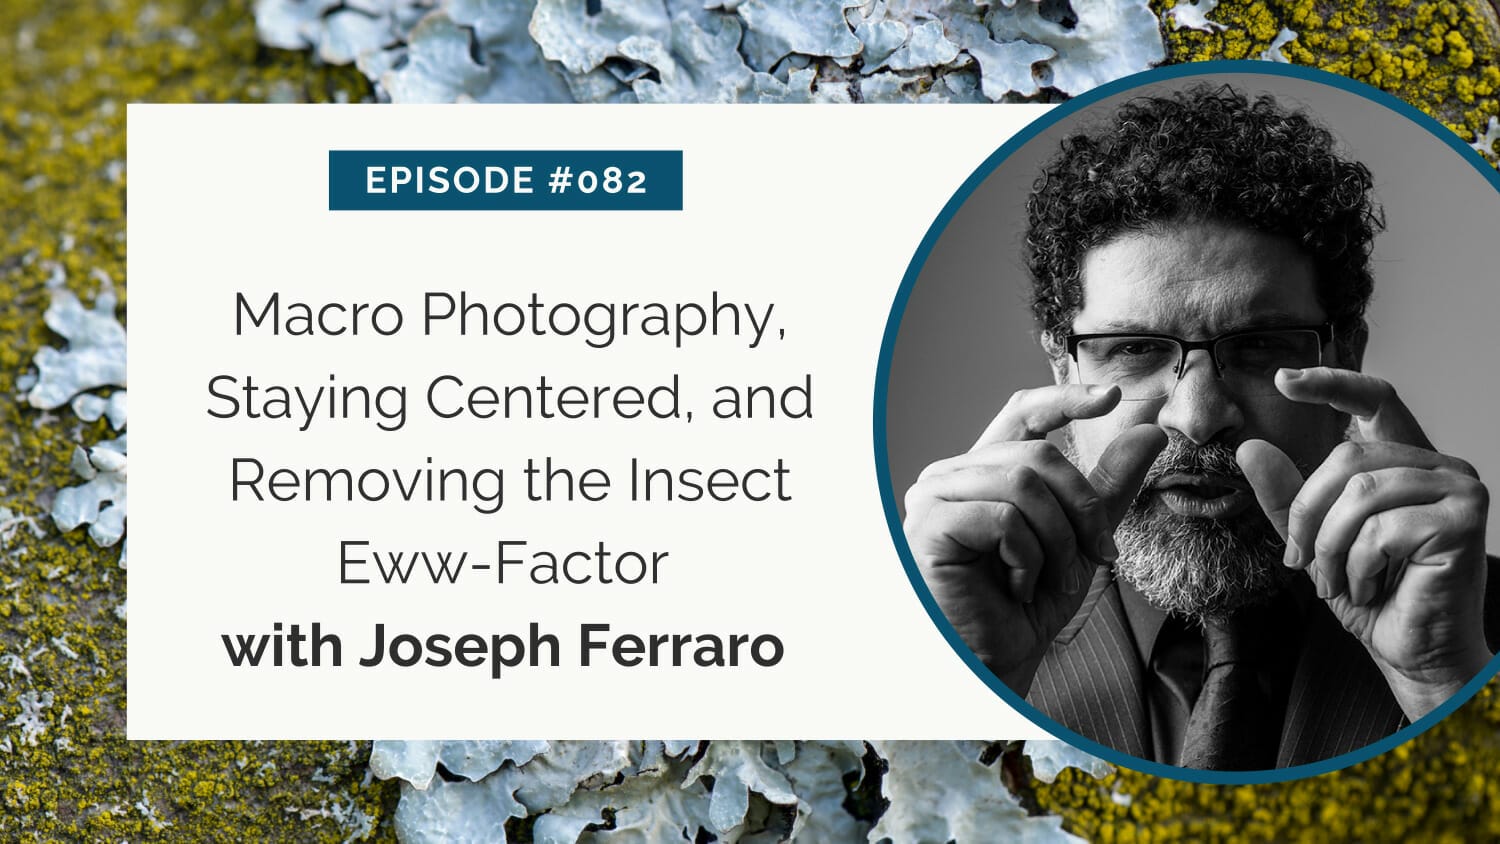 Podcast episode #082: a discussion on macro photography and overcoming discomfort with insects featuring joseph ferraro.